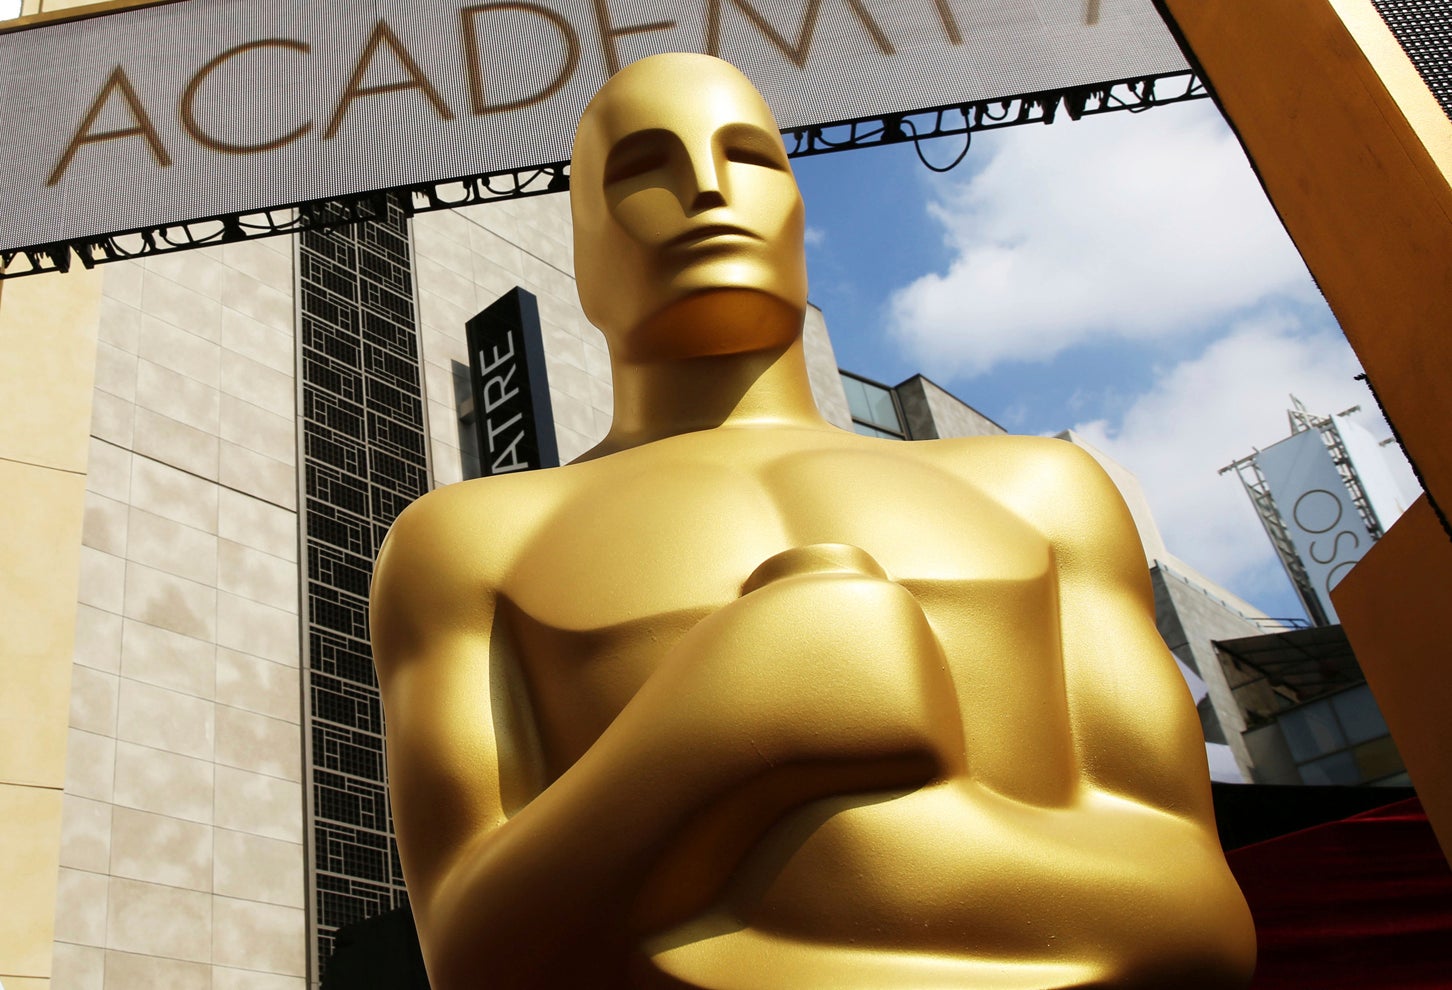 alt = a large gold Oscar statue appears outside the Dolby Theatre for the 87th Academy Awards in Los Angeles.